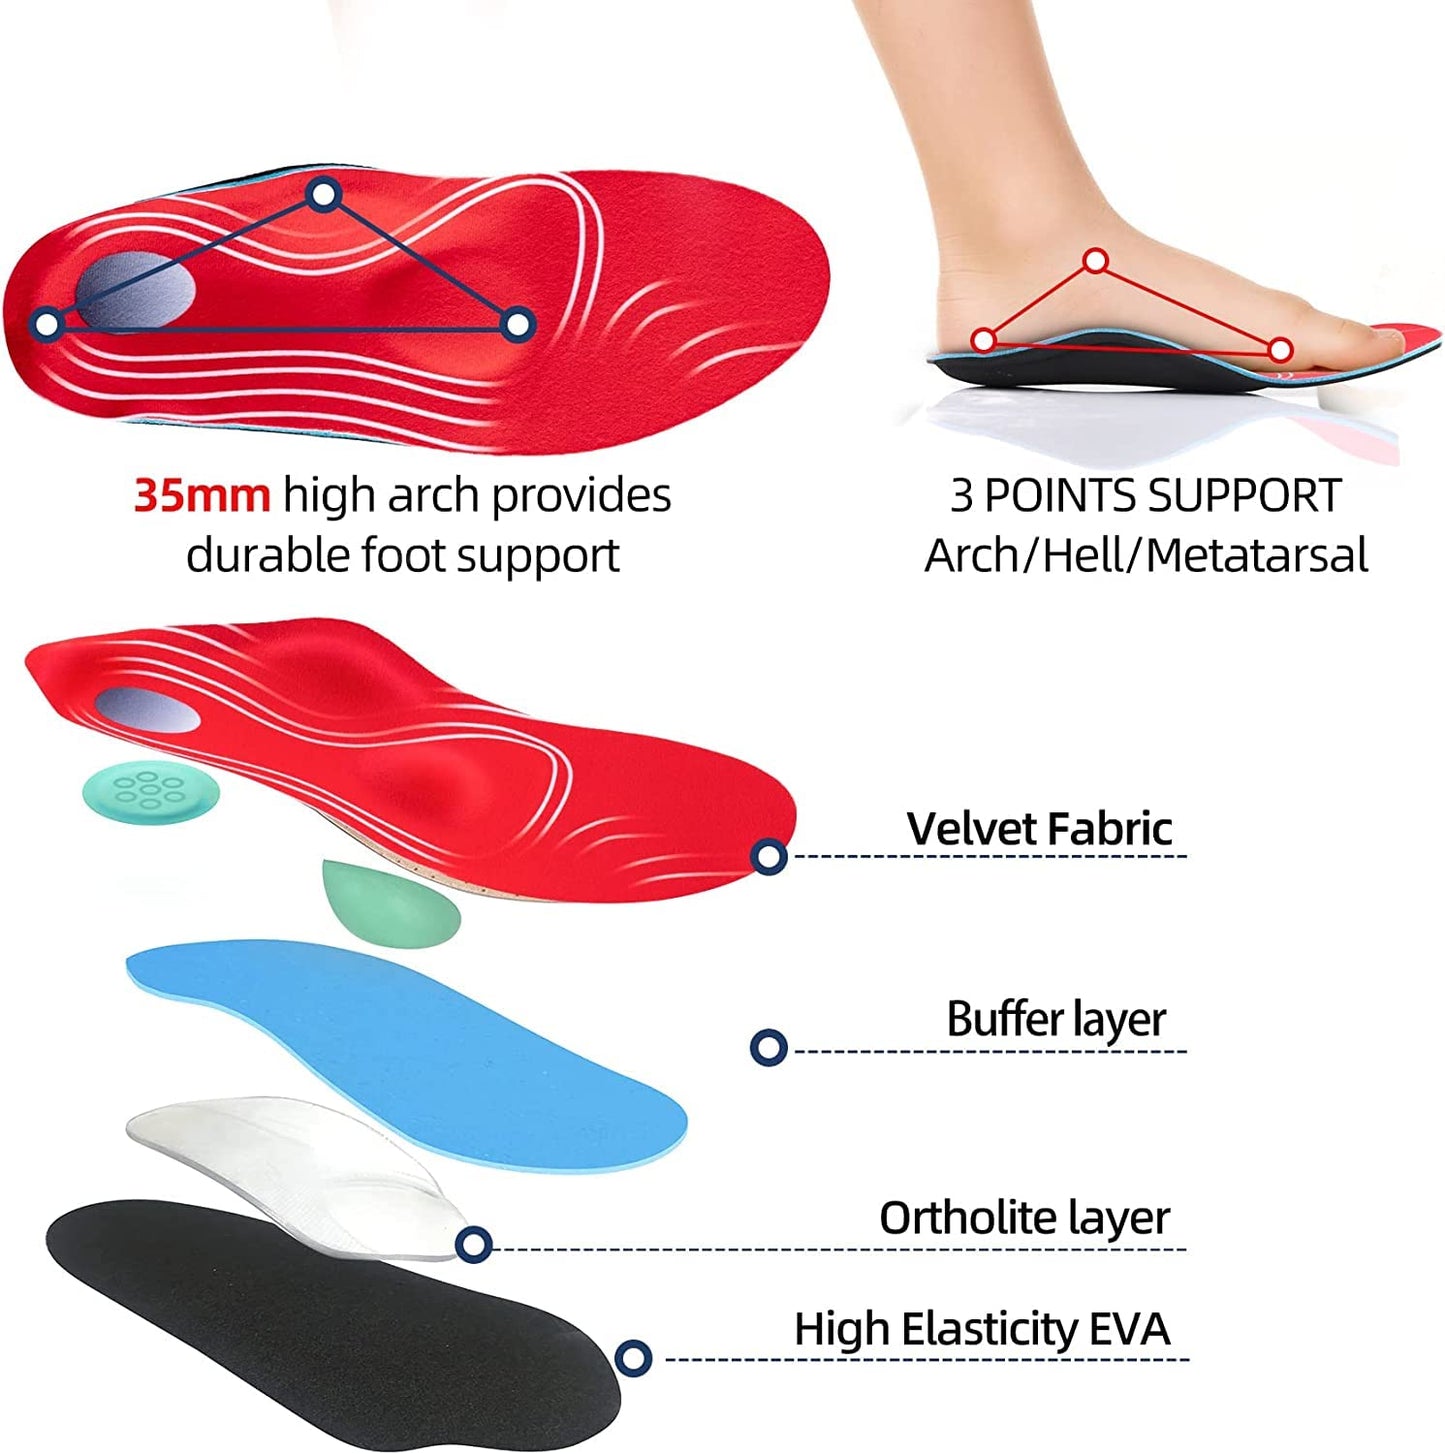 Orthotic Insoles Arch Support, Soft Plantar Fasciitis Insoles, Full-Length Shock Absorption Cushioning Function Inserts for Flat Feet, Heel Spurs Foot Pain, overpronation for Men Women （L 44-45）